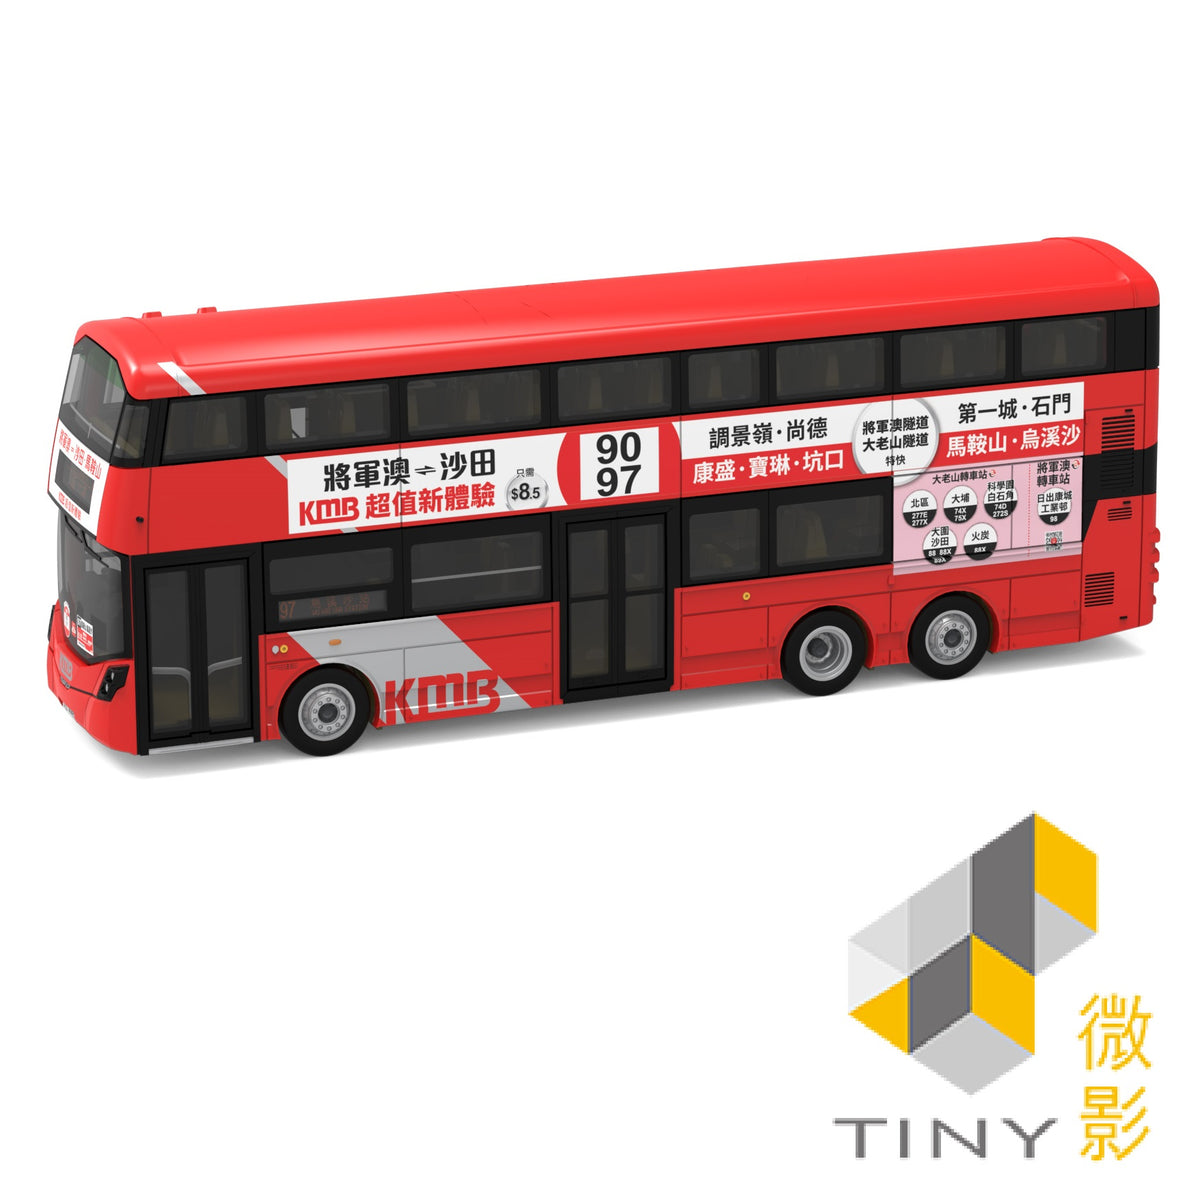 PPREORDER TINY 微影 1/110 KMB VOLVO B8L WRIGHT (Wu Kai Sha Station 97 烏溪沙站)  KMB2023052 (Approx. Release Date : JUNE 2023 subject to manufacturer's  final 